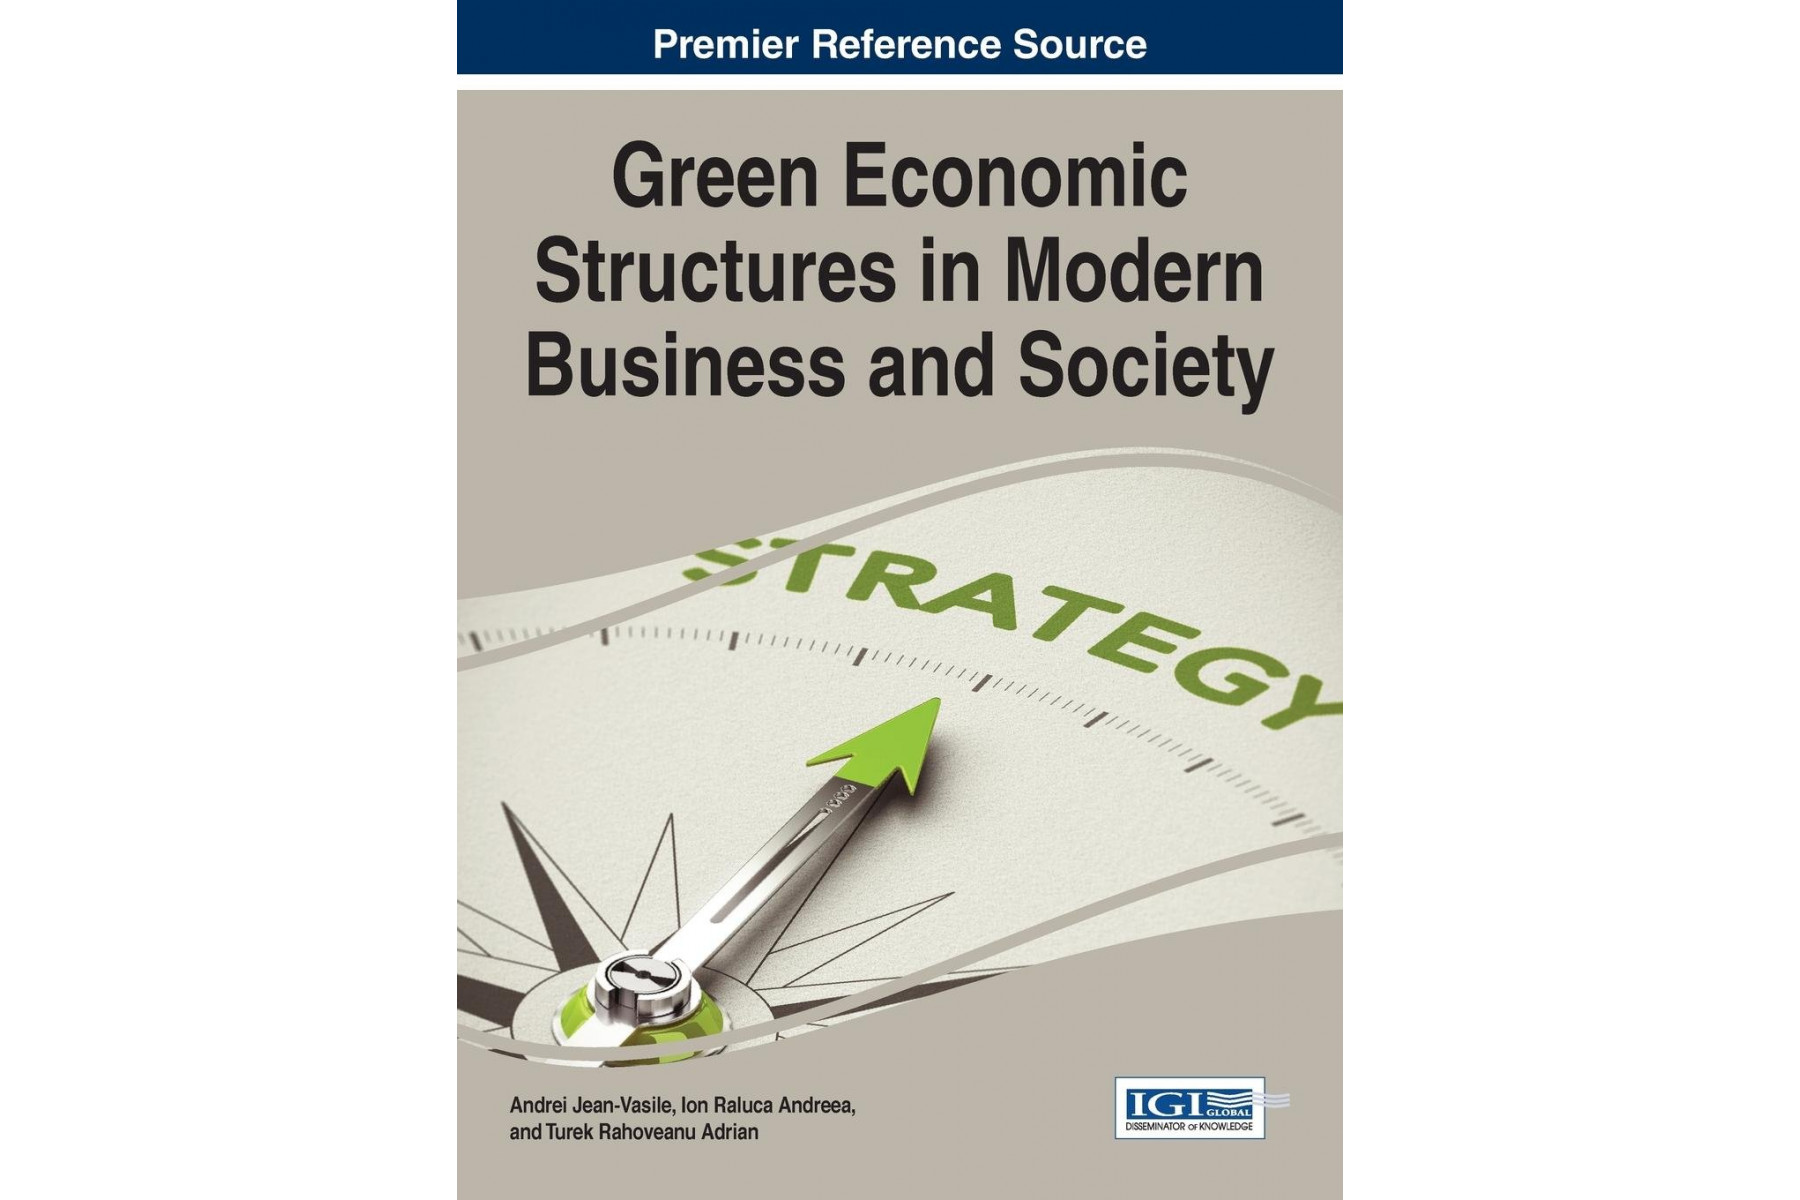 Green Economic Structures in Modern Business and Society